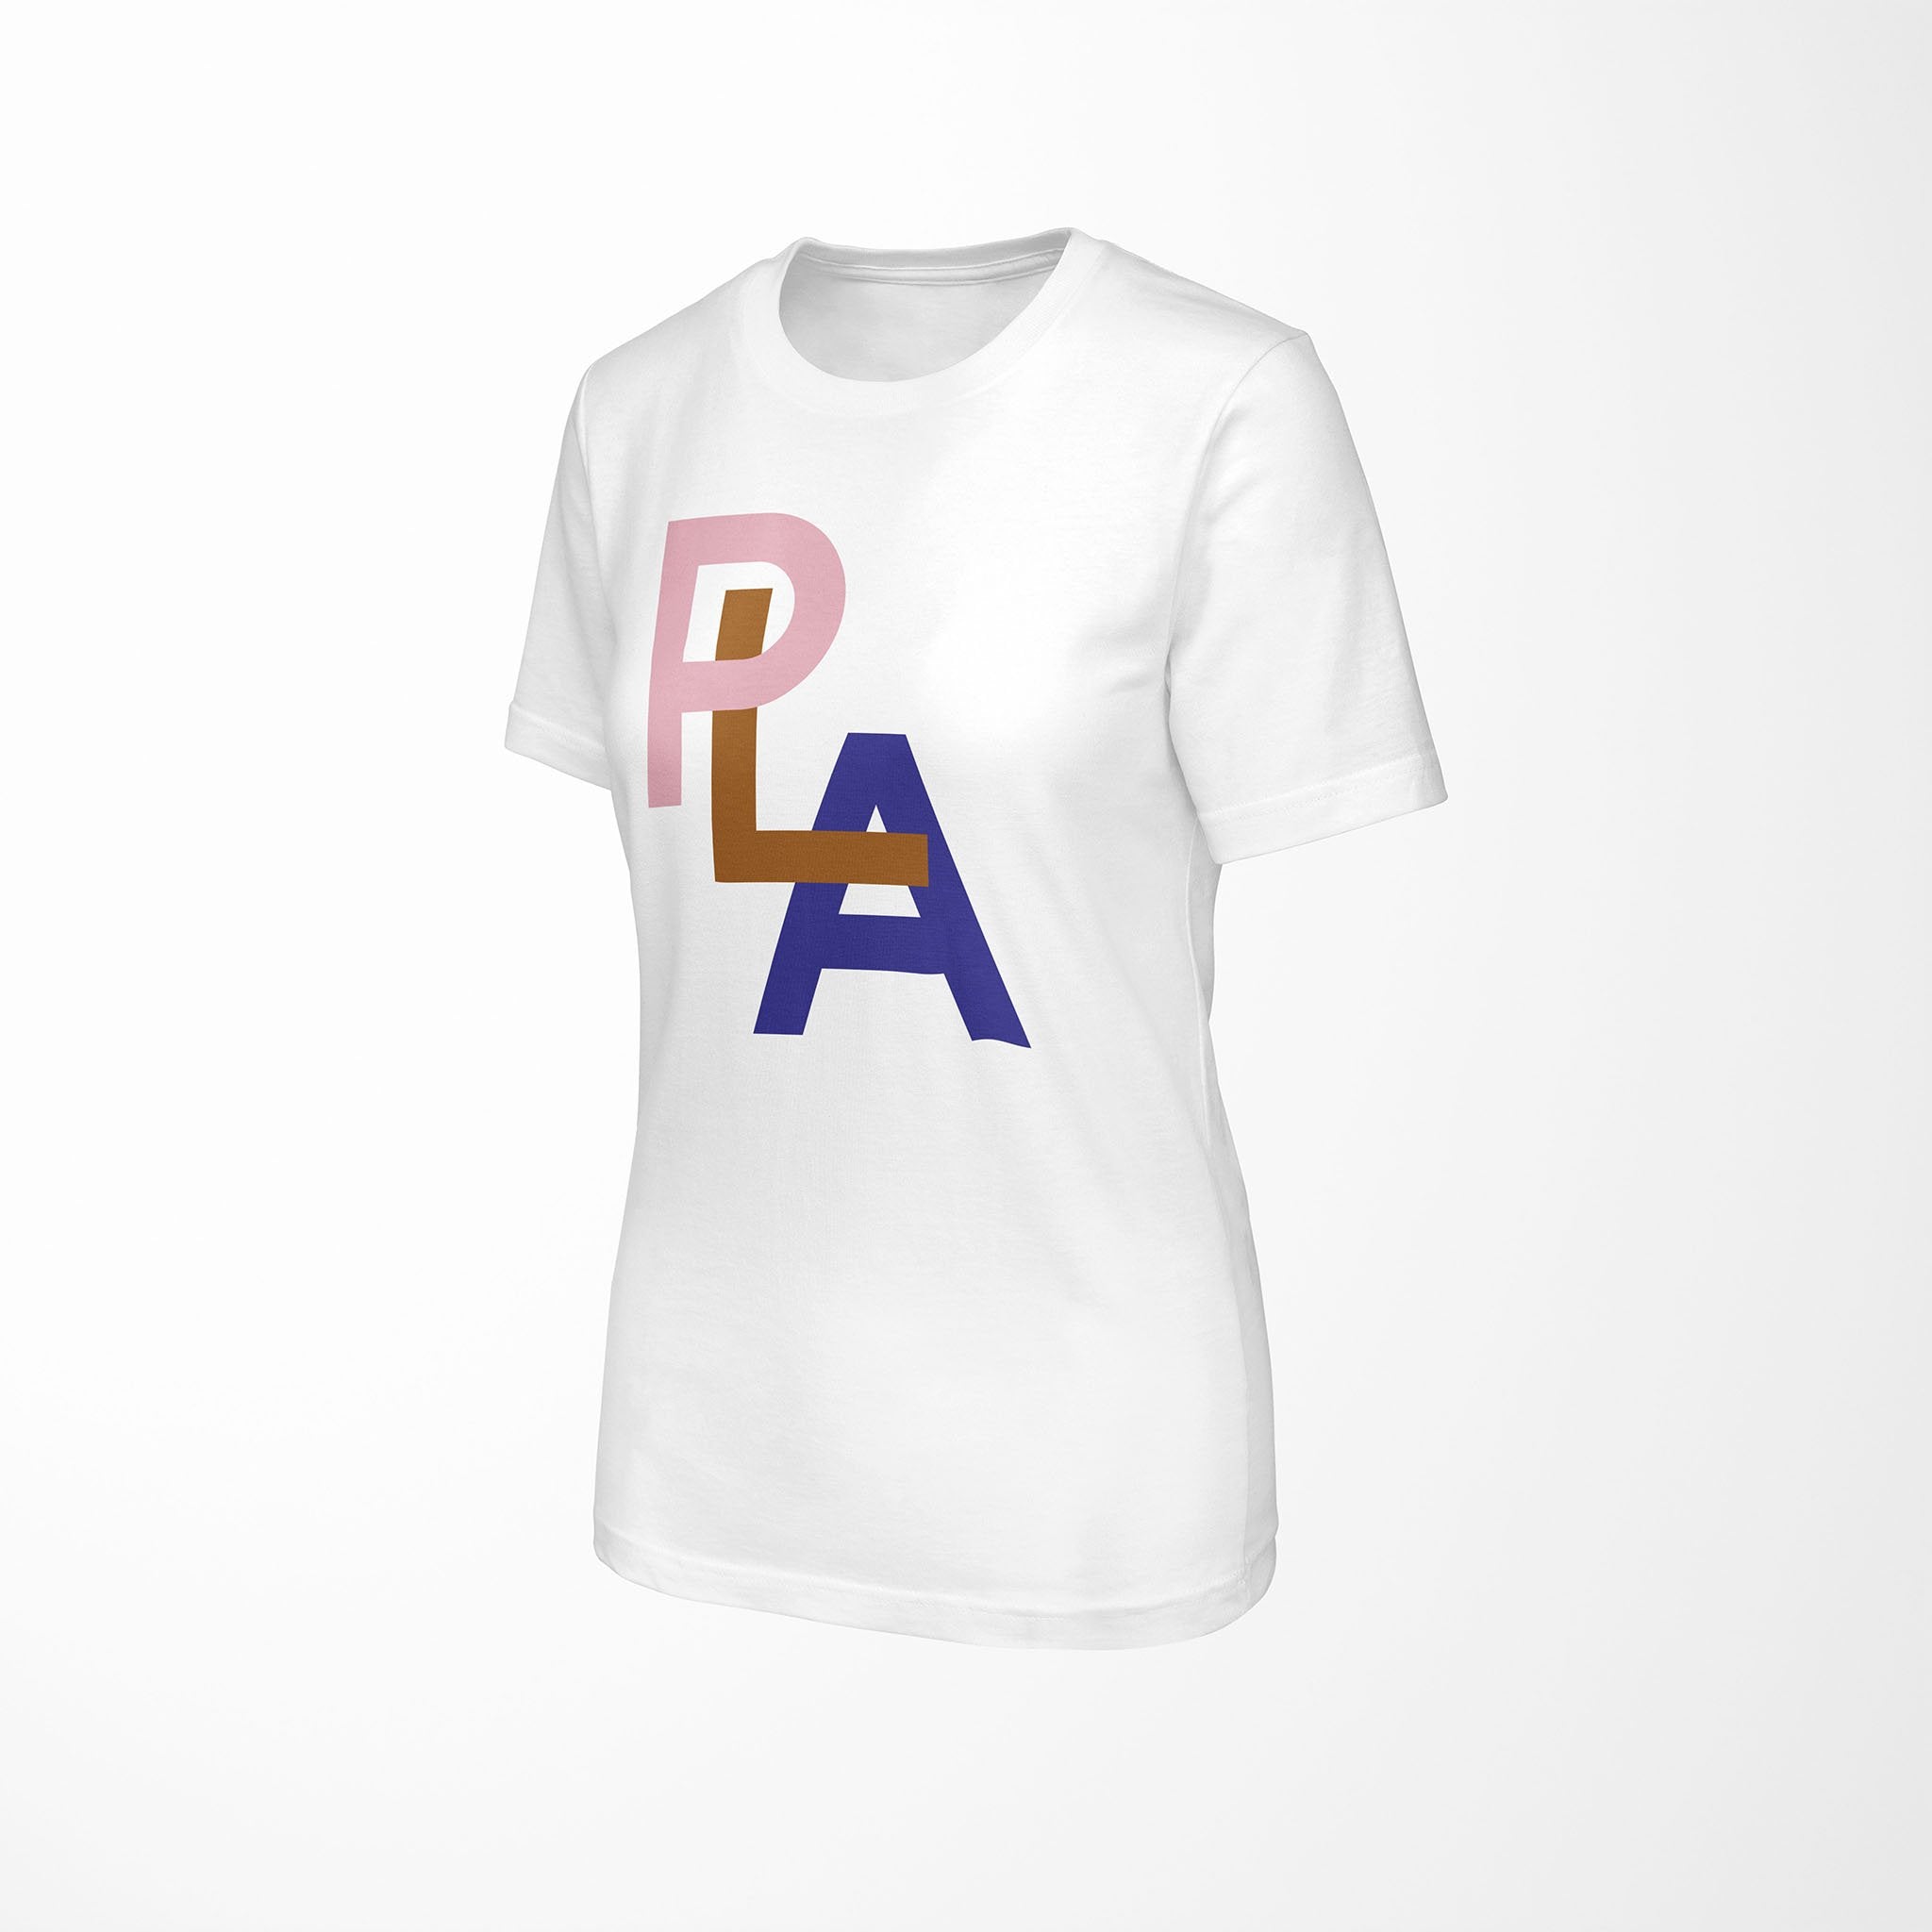 PLA Relaxed Fit Women's 100% Cotton White T-Shirt angle view